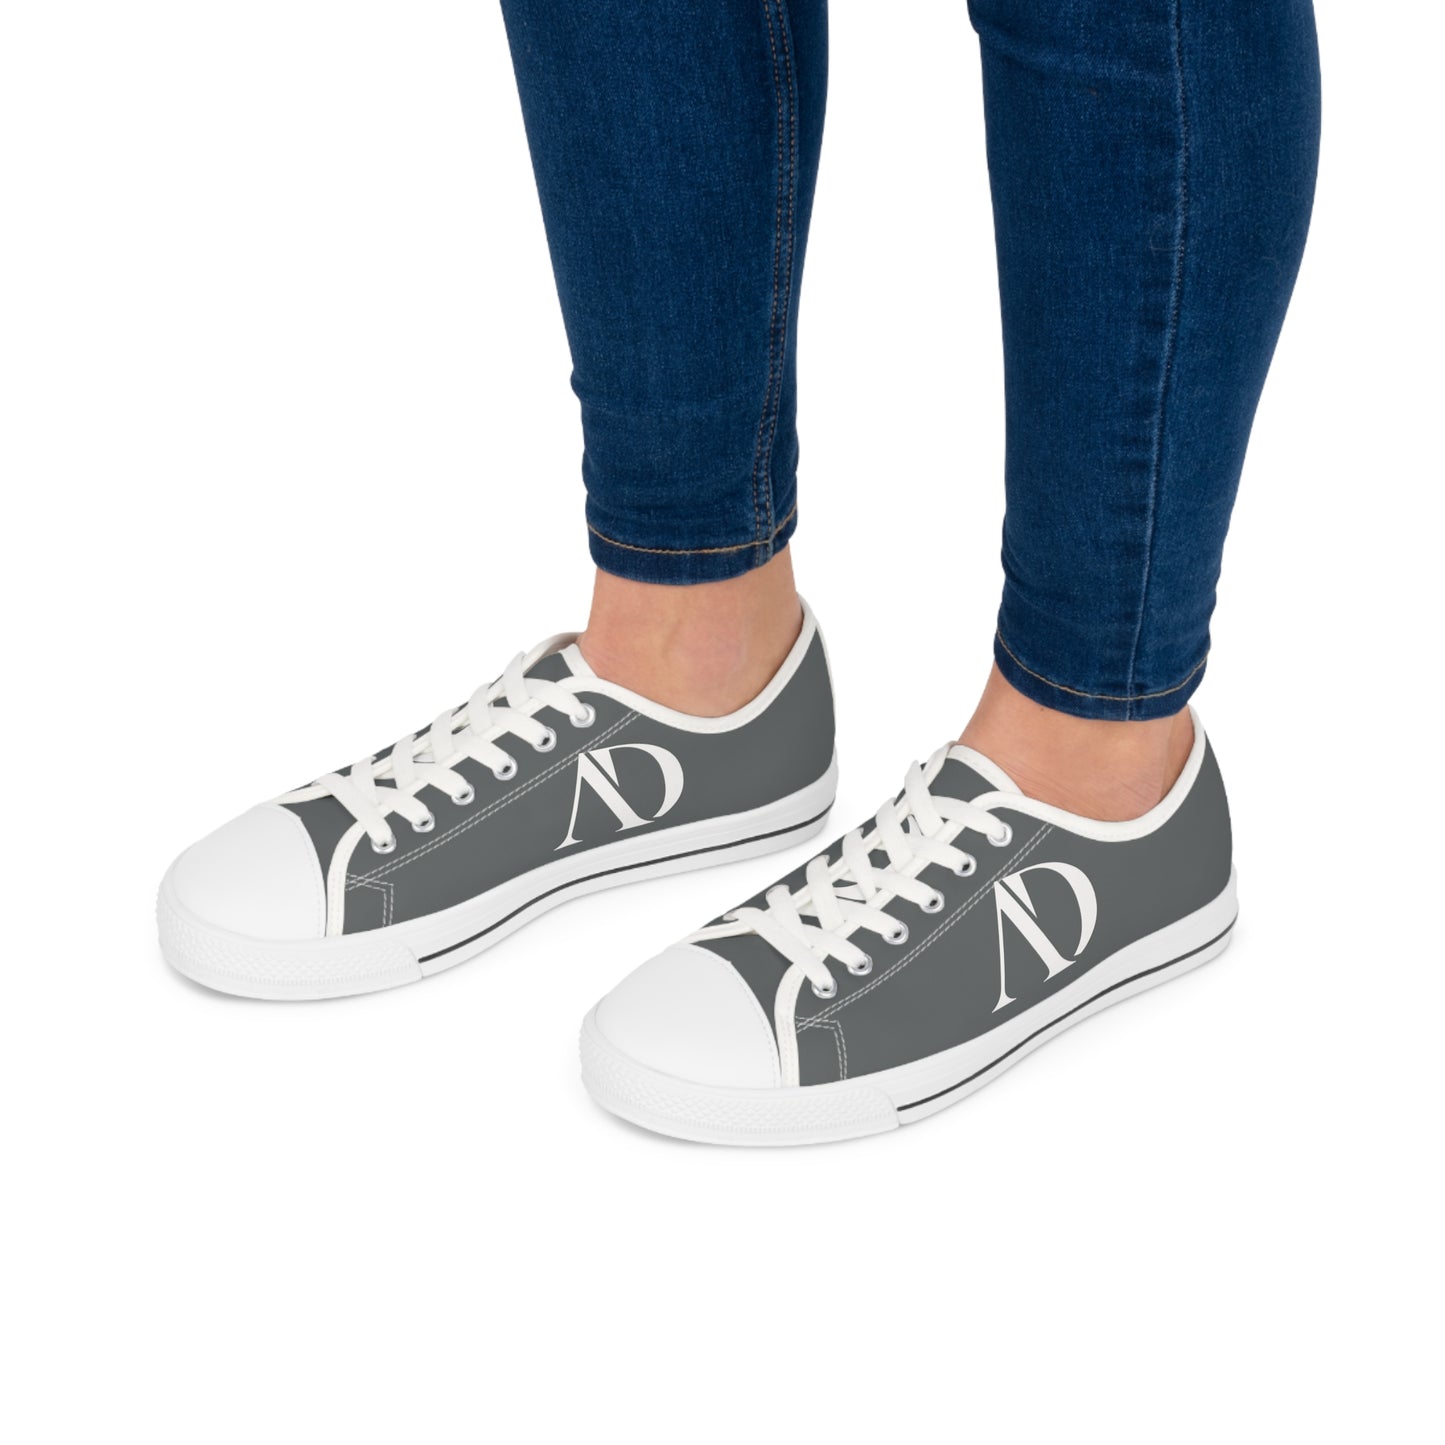 DeCrypt De Classic™ Grey on White Low Top Sneakers For Women